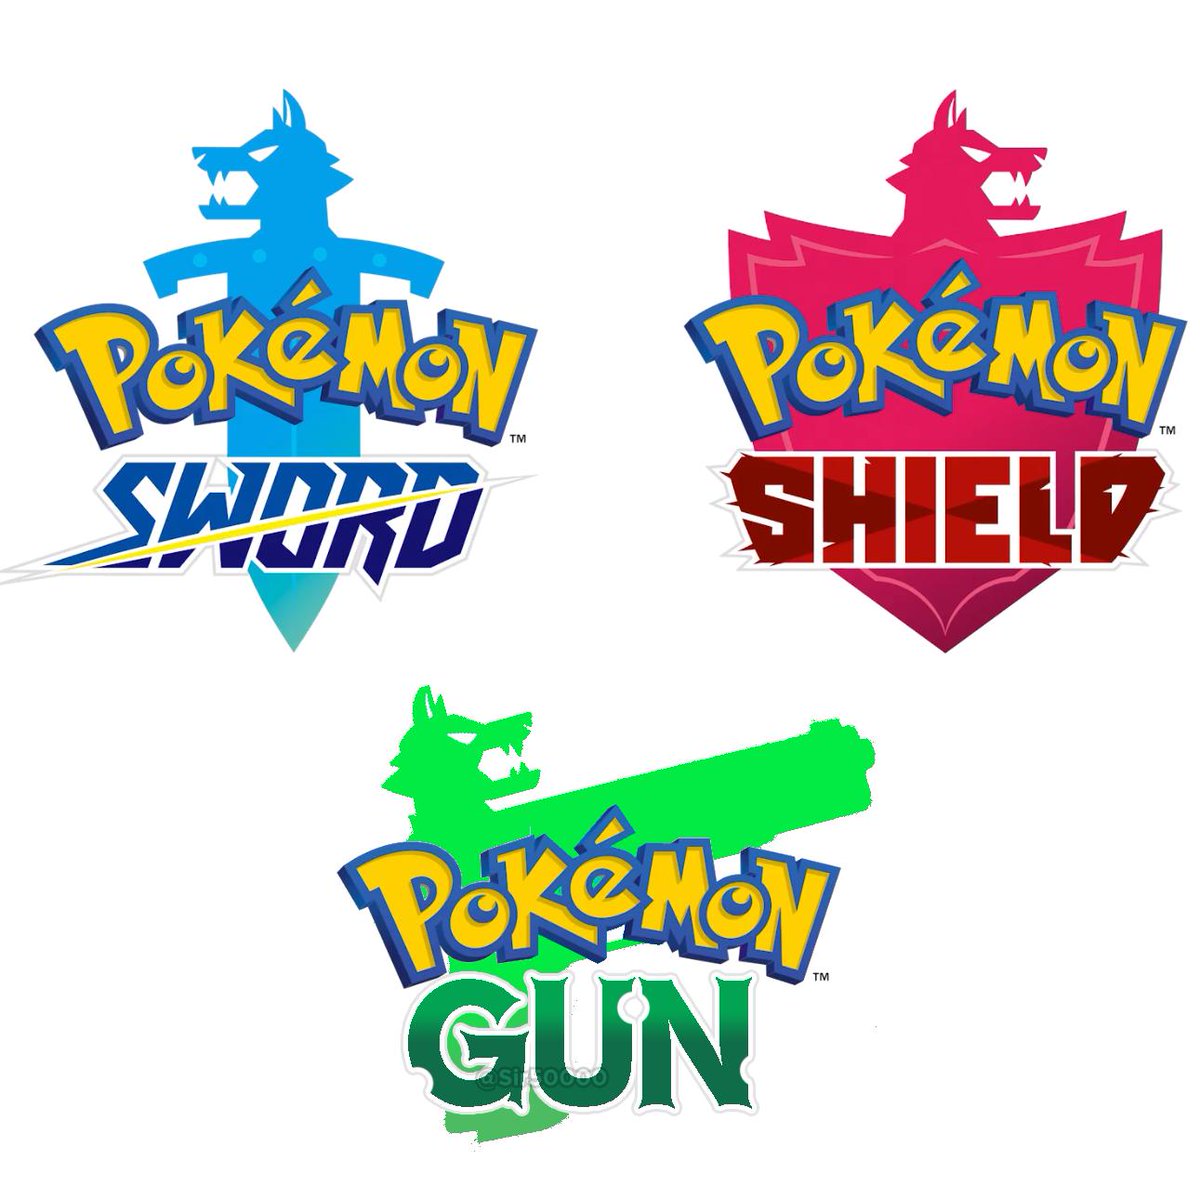 Pokemon V Twitter Unsheathe Your Sword And Take Up Your Shield The World Of Pokemon Expands To Include The Galar Region In Pokemon Sword And Pokemon Shield Coming In Late